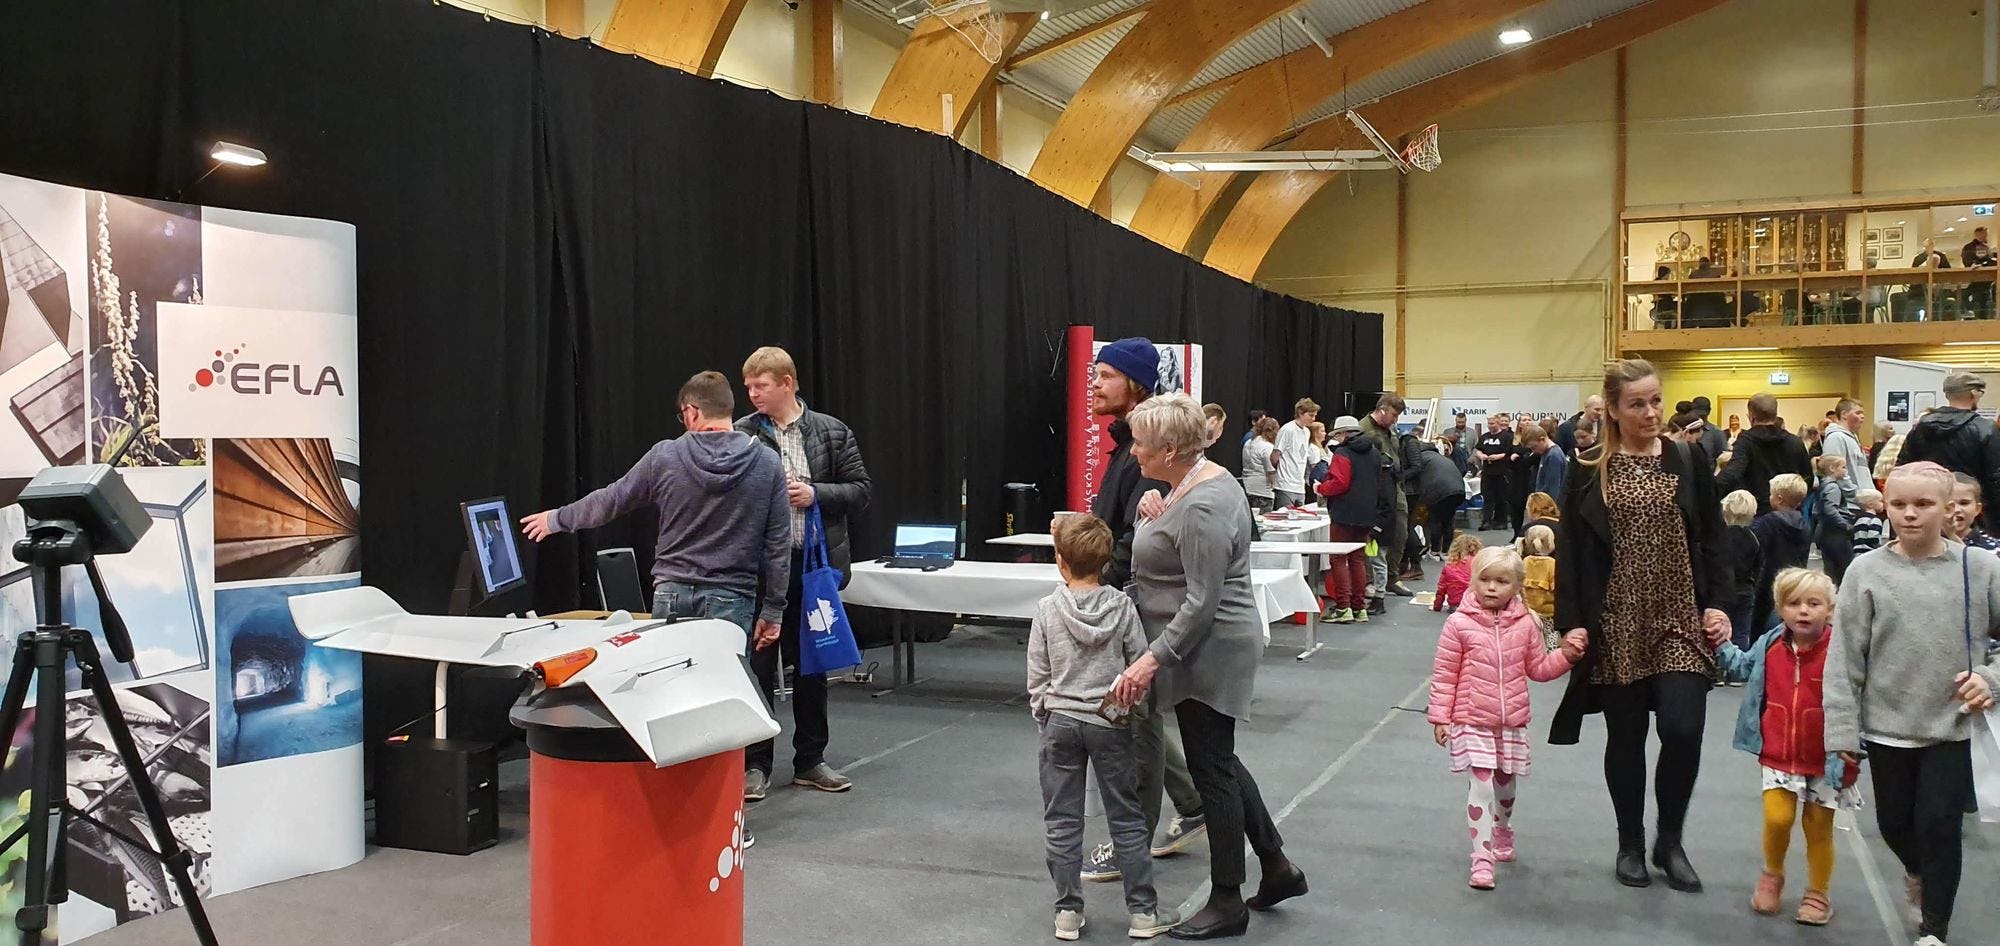 An indoor event where people are engaging with exhibition booth about drones